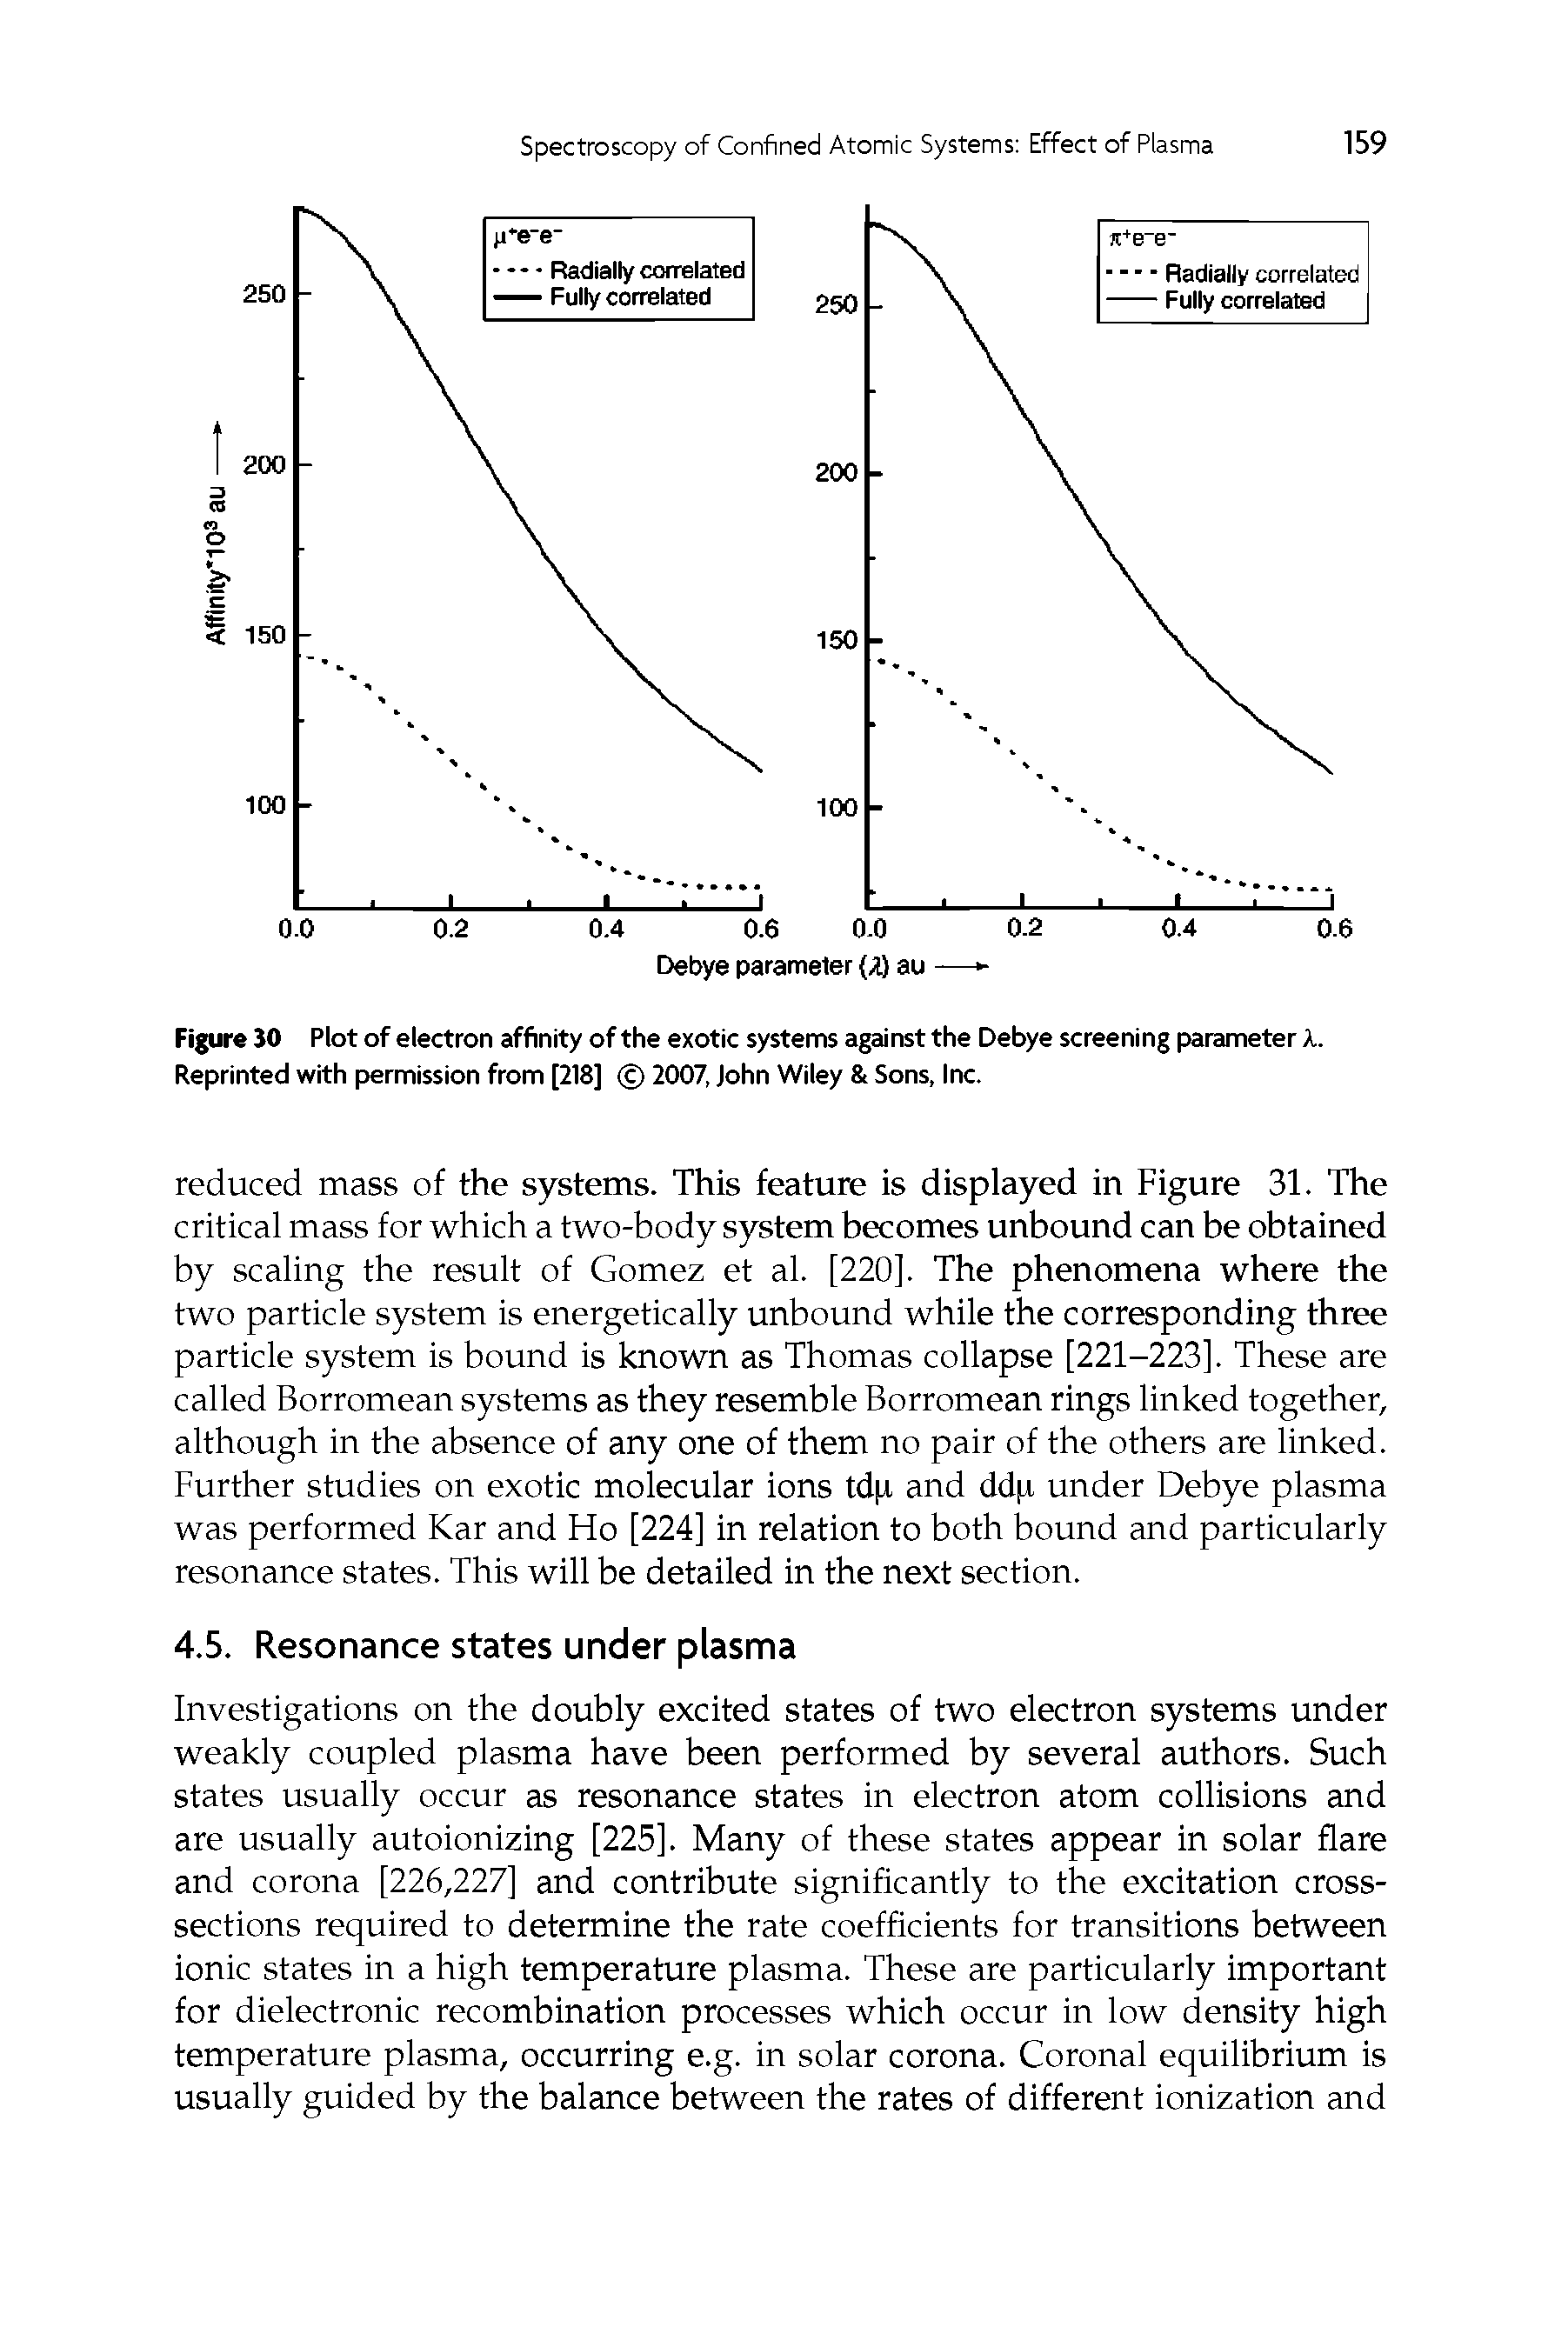 Figure 30 Plot of electron affinity of the exotic systems against the Debye screening parameter X. Reprinted with permission from [218] 2007, John Wiley 8t Sons, Inc.